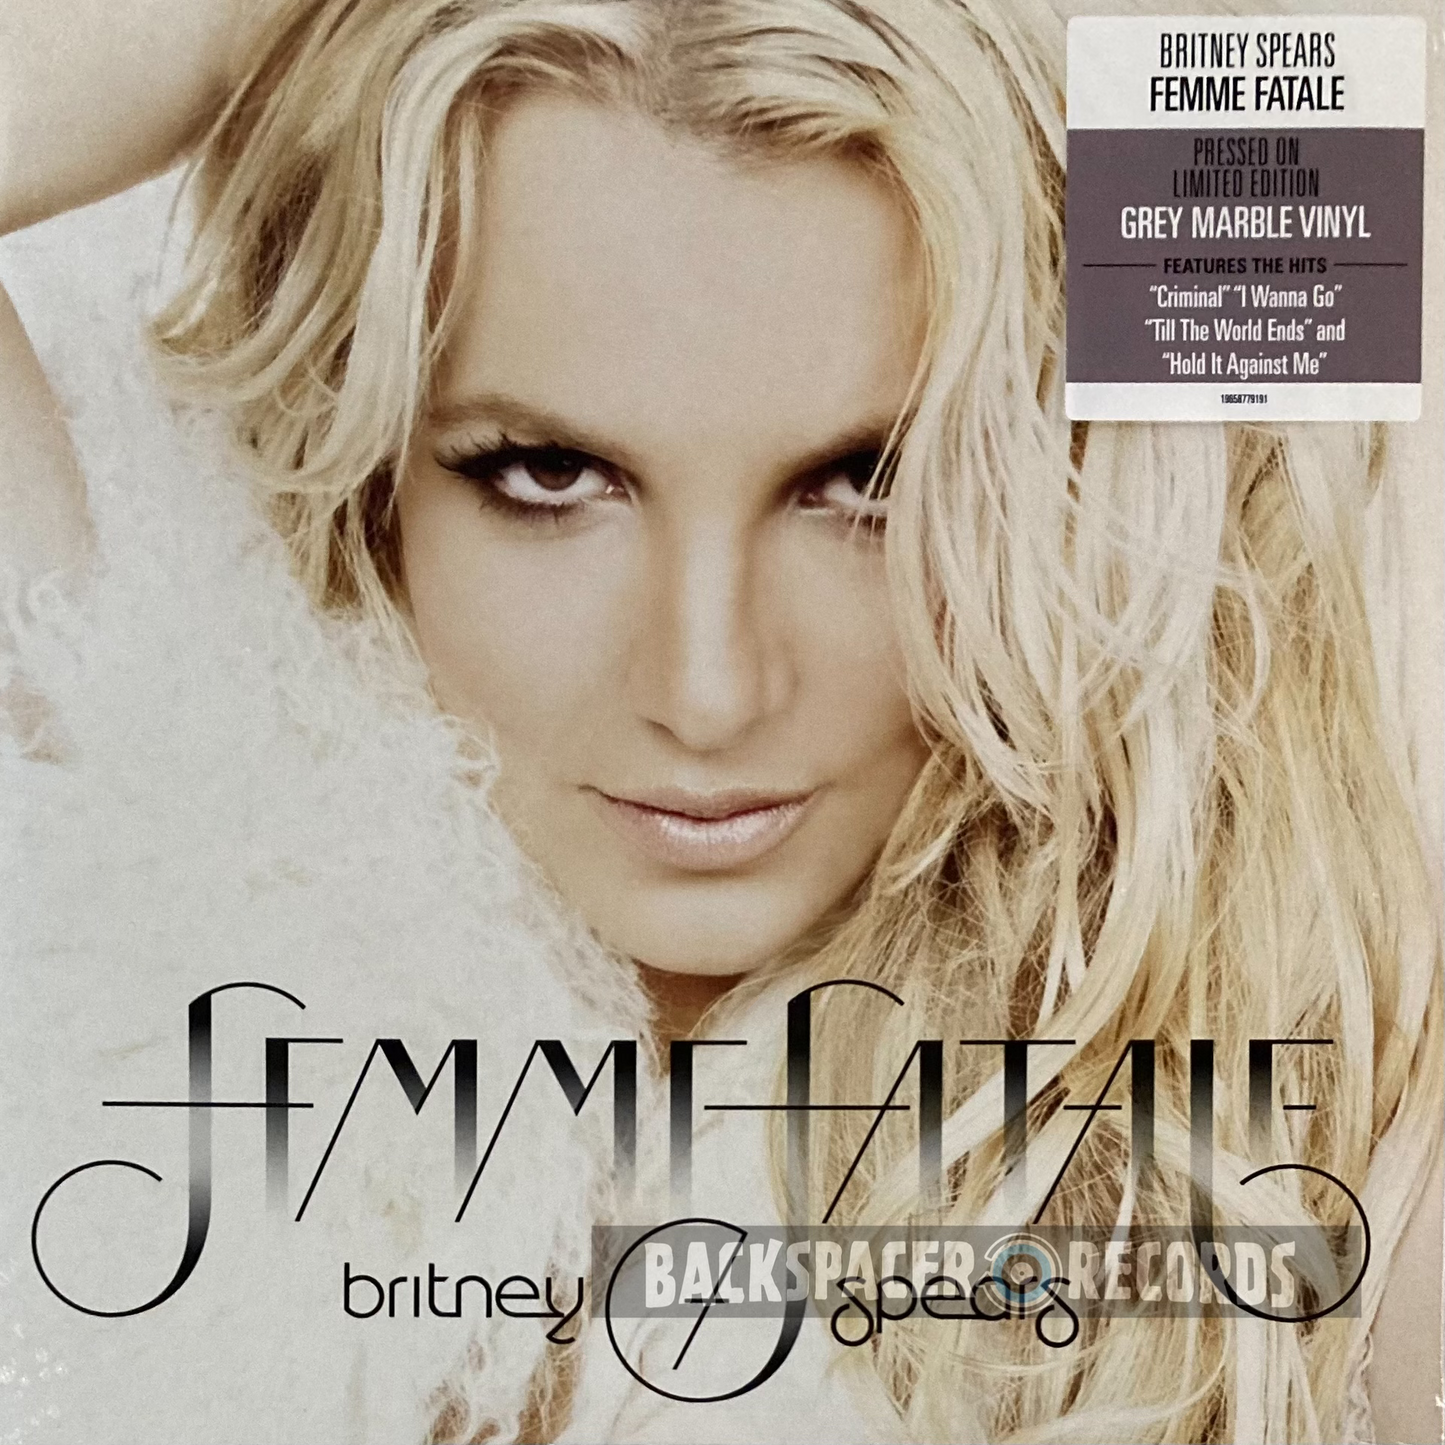 Britney Spears – Femme Fatale (Limited Edition) LP (Sealed)